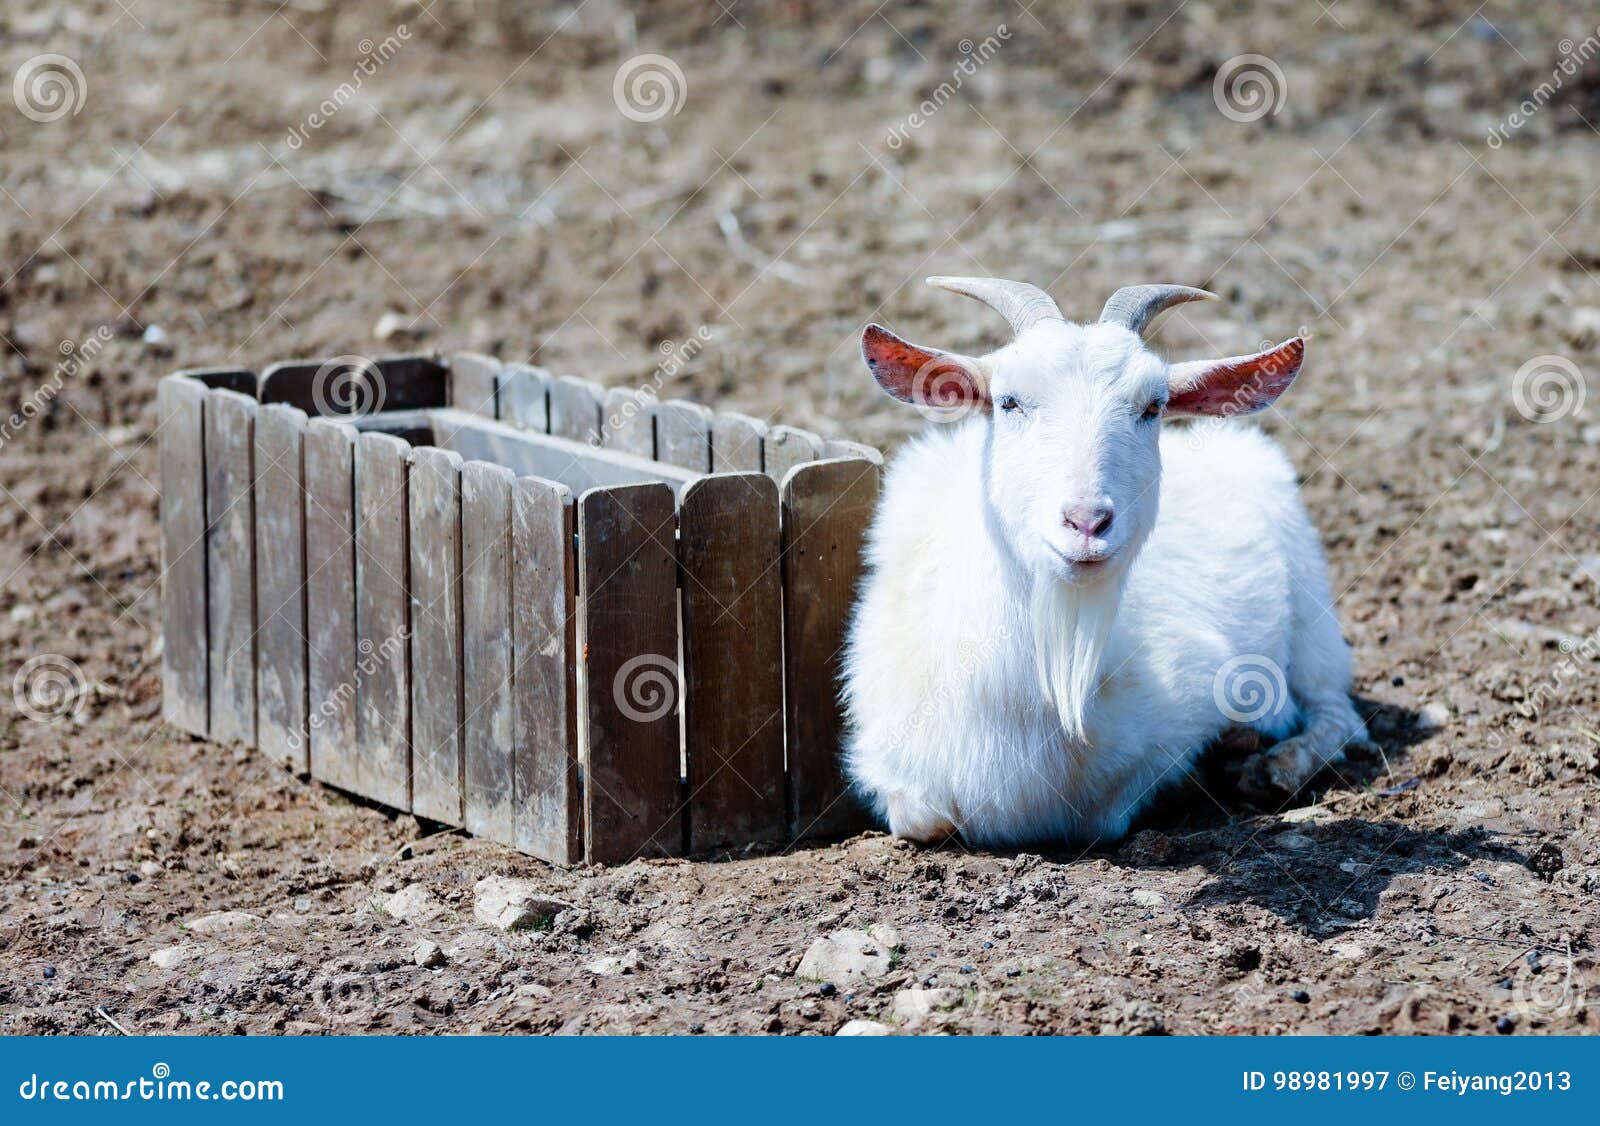 Goat stock image. Image of agriculture, farm, outdoors - 98981997